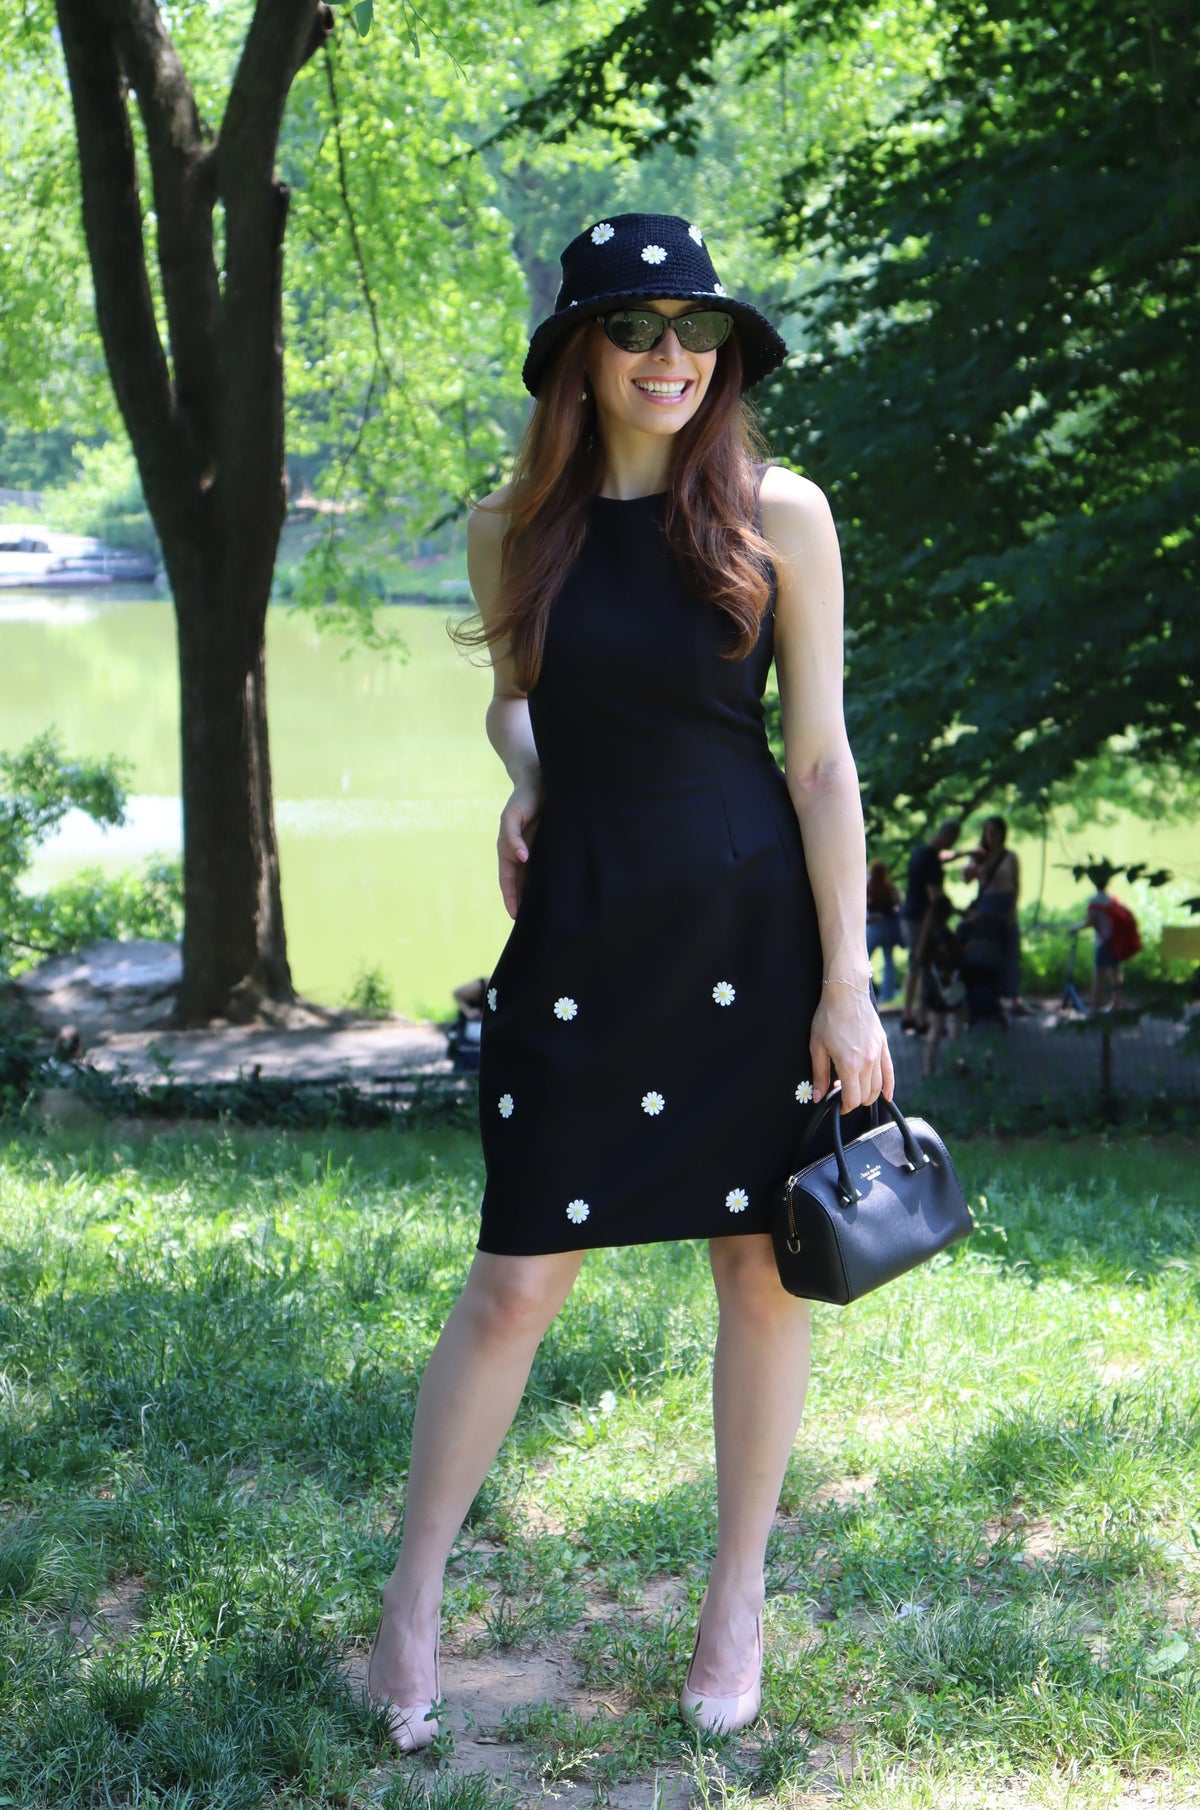 Model in a black dress with white daisy appliques standing with hand on hip  in front of a tree and a lake.